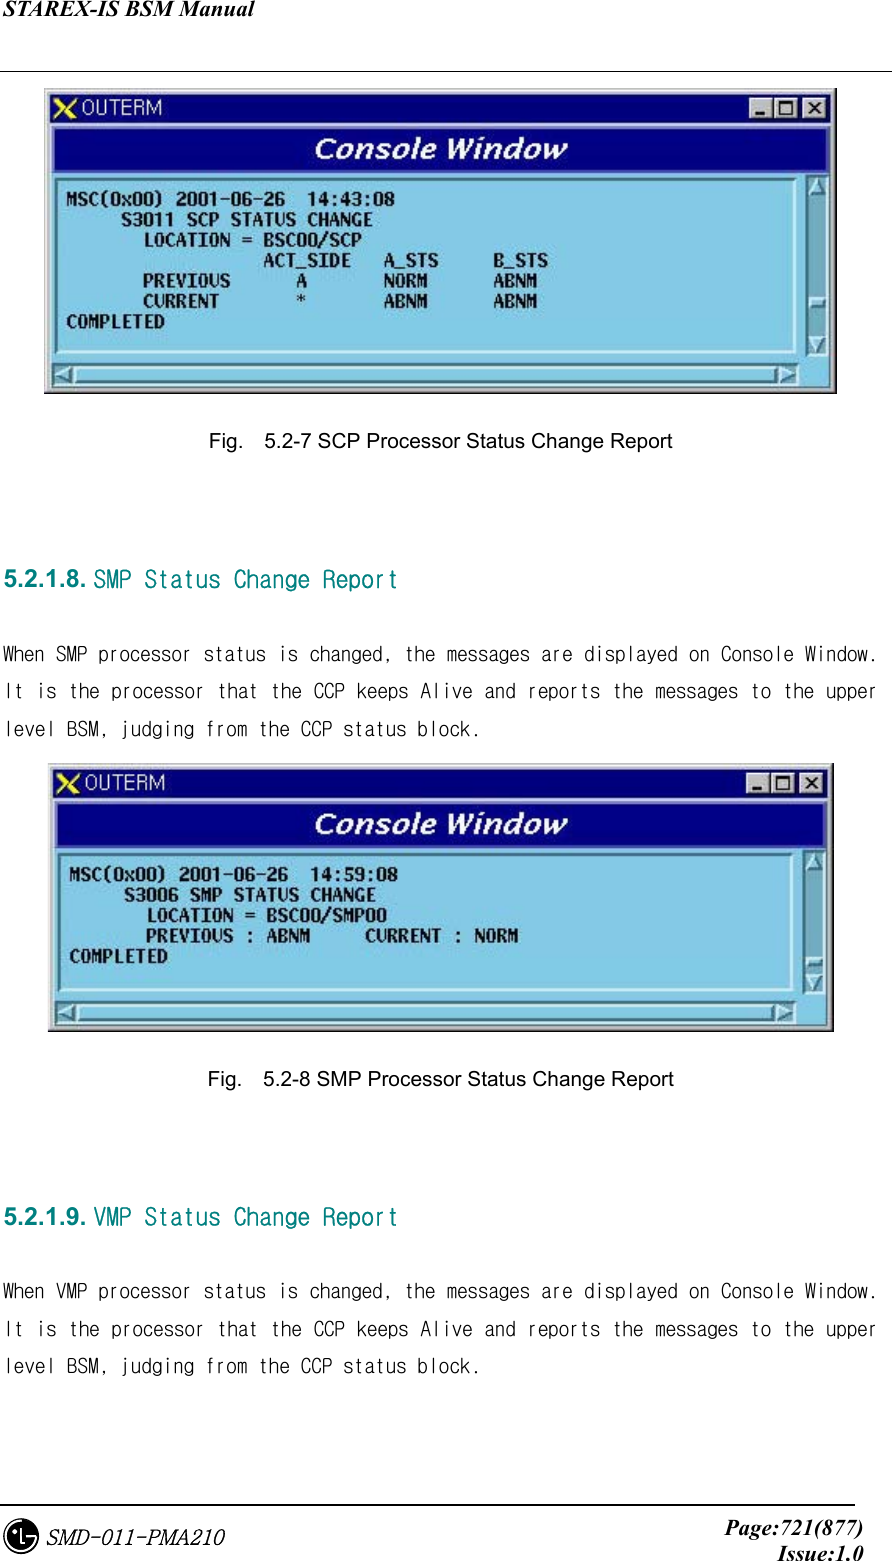 STAREX-IS BSM Manual     Page:721(877)Issue:1.0SMD-011-PMA210  Fig.    5.2-7 SCP Processor Status Change Report   5.2.1.8. SMP Status Change Report  When SMP processor status is changed, the messages are displayed on Console Window. It is the processor that the CCP keeps Alive and reports the messages to the upper level BSM, judging from the CCP status block.  Fig.    5.2-8 SMP Processor Status Change Report   5.2.1.9. VMP Status Change Report  When VMP processor status is changed, the messages are displayed on Console Window. It is the processor that the CCP keeps Alive and reports the messages to the upper level BSM, judging from the CCP status block. 